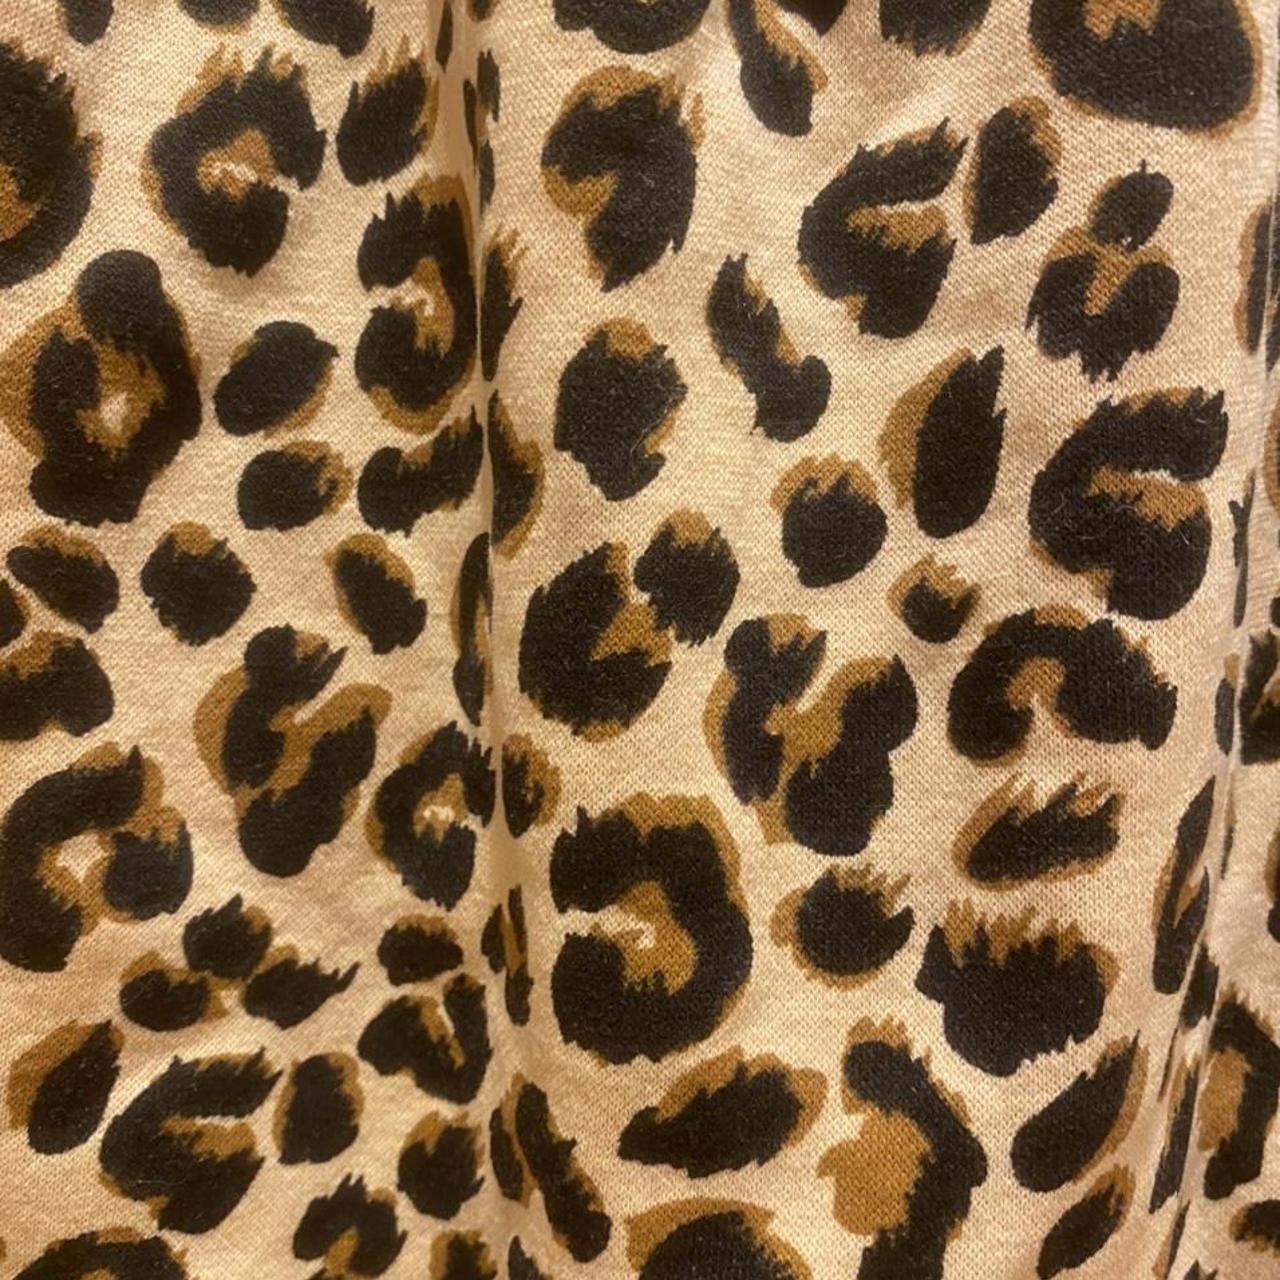 Leopard print sweater that can be worn on or off the - Depop